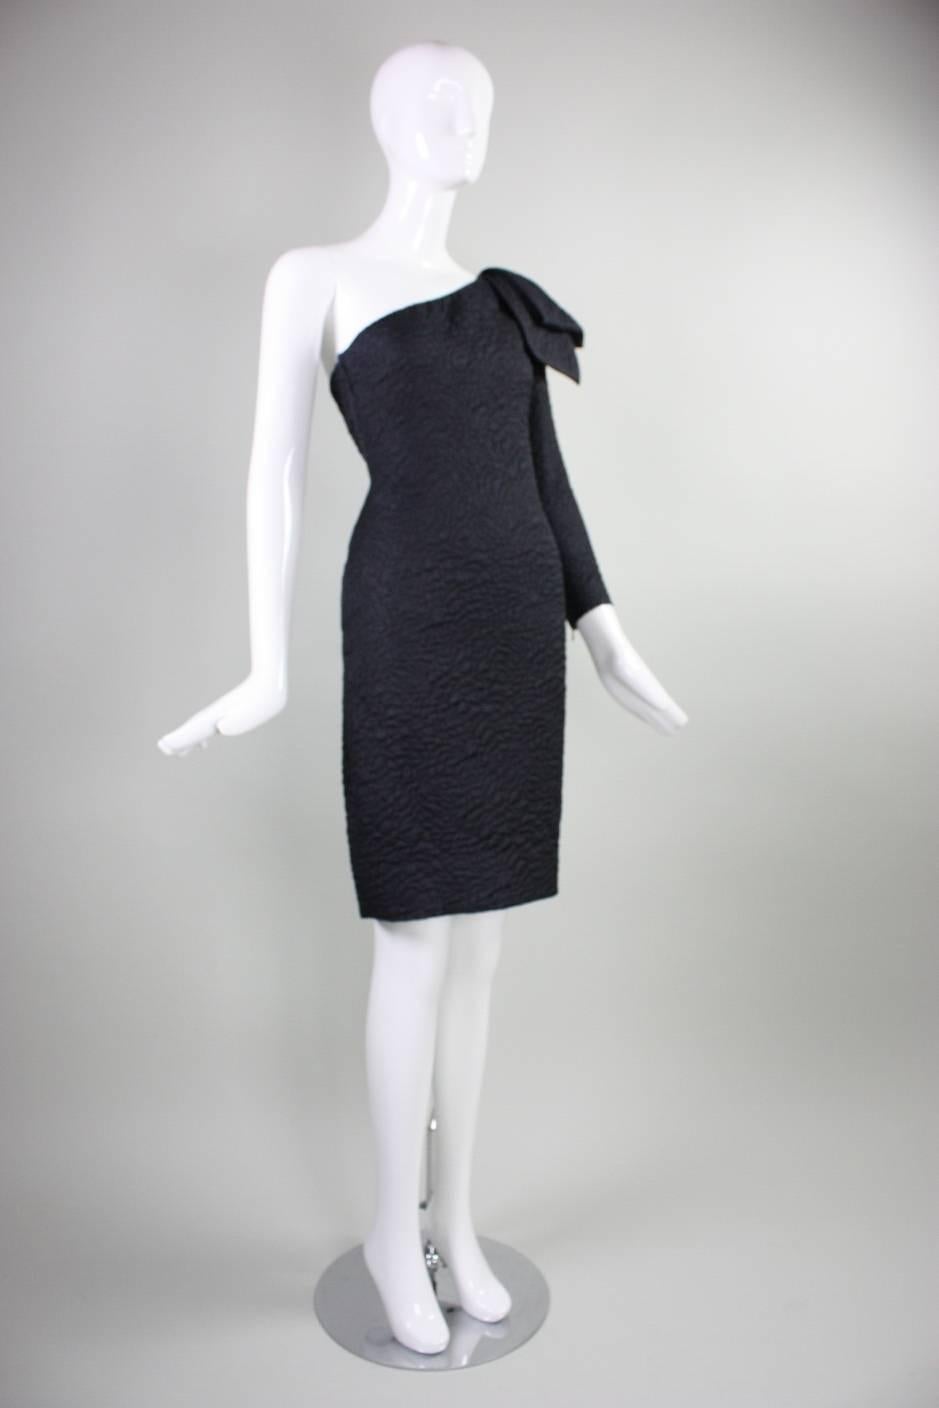 Vintage cocktail dress from Yves Saint Laurent dates to the 1980's and is made of a textured wool/silk blend.  Dress features a dramatic one-shouldered design with an oversized bow on the shoulder.  Zipped cuff.  Fully lined.  Side zipper.

Labeled